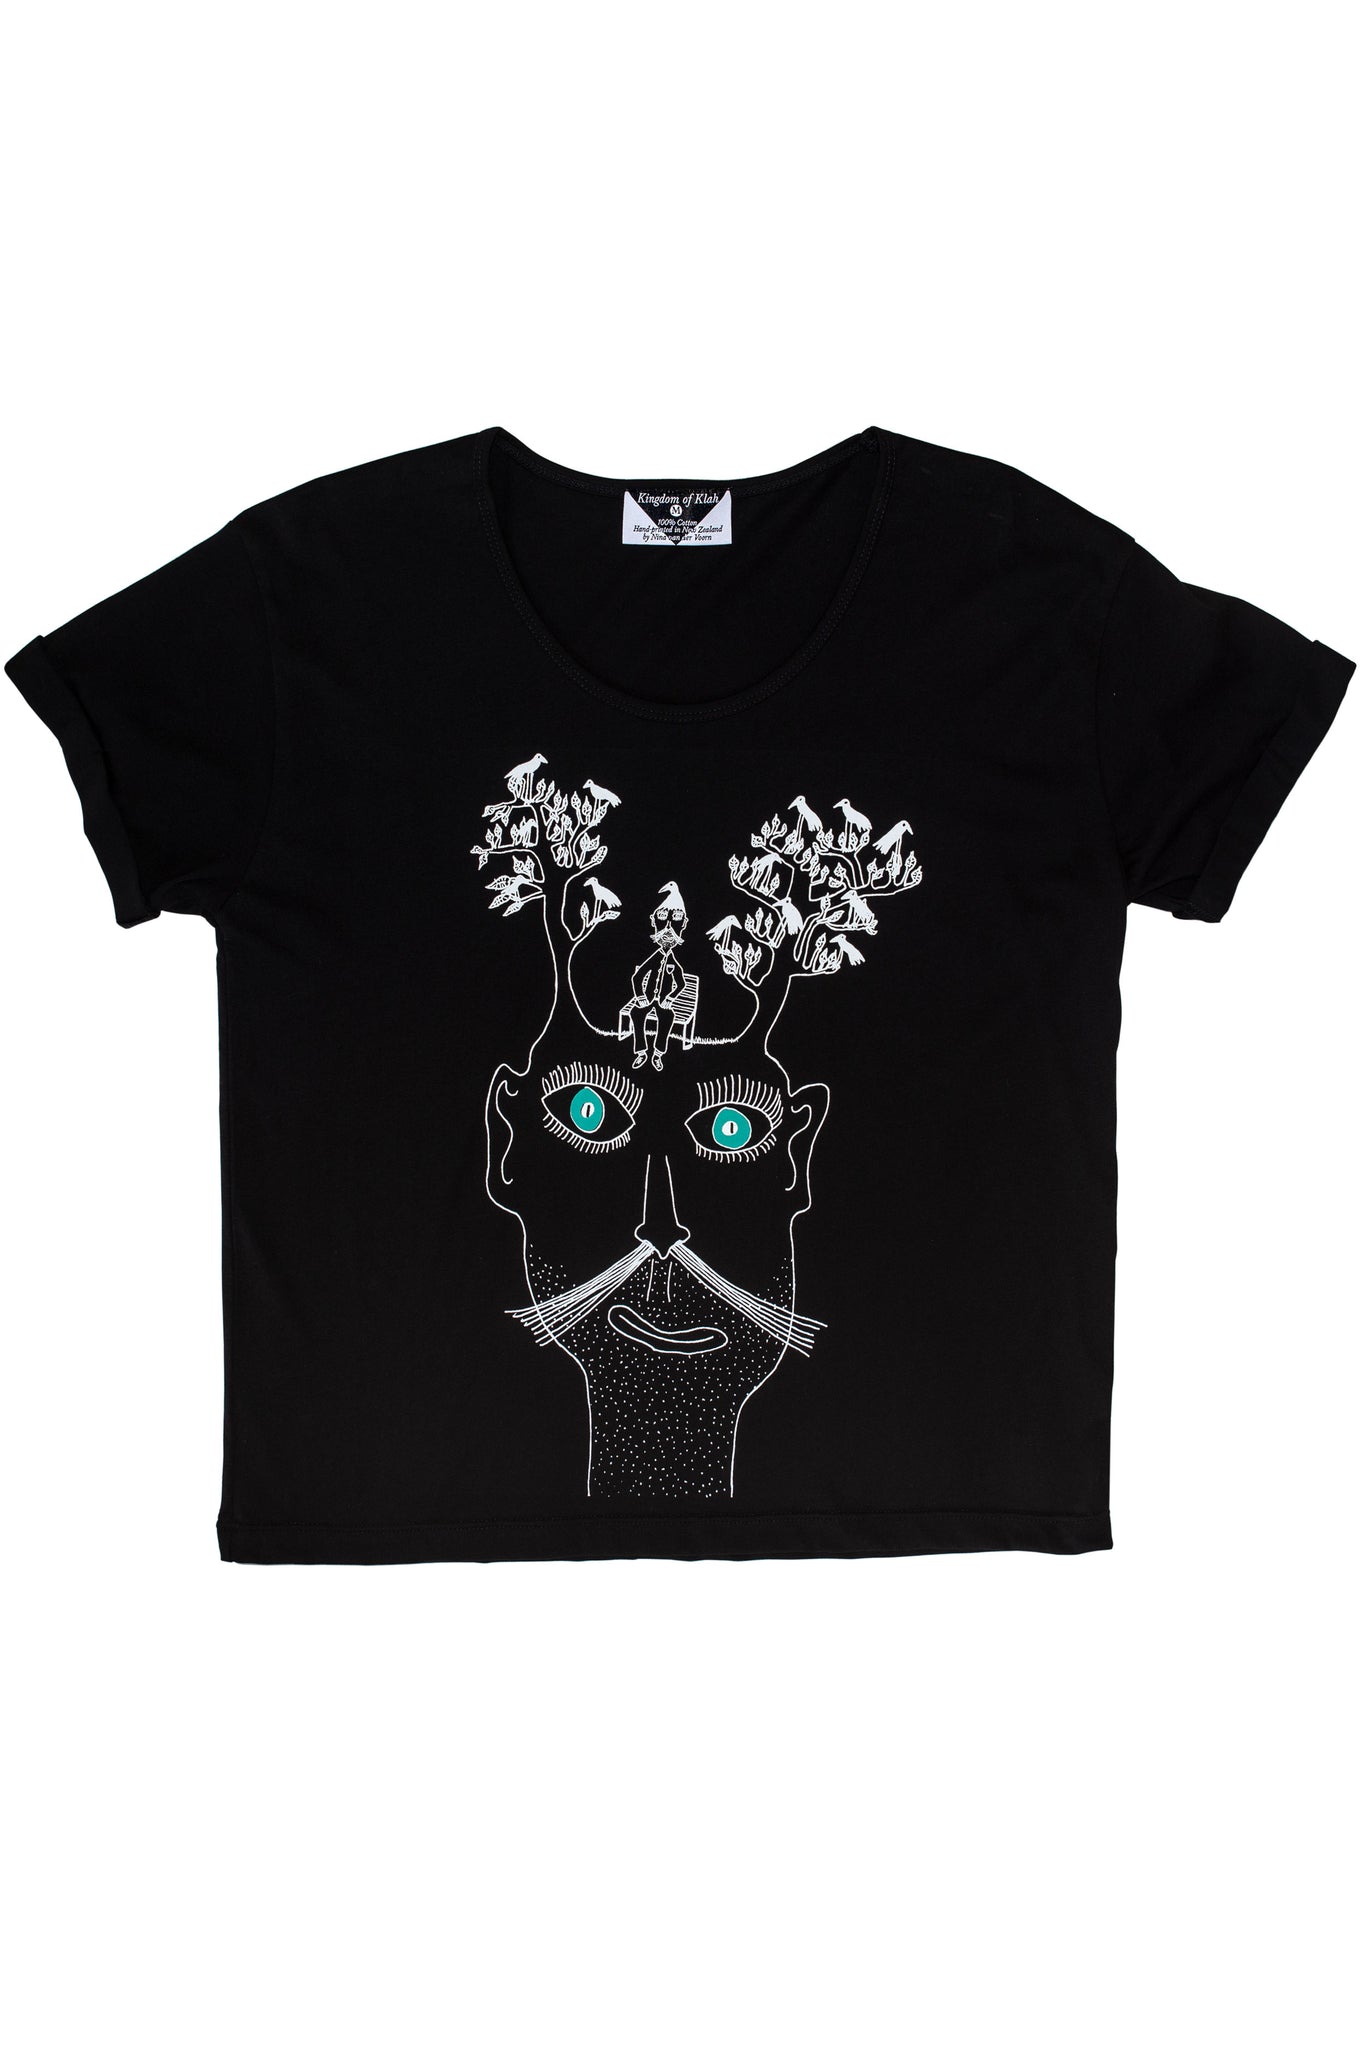 The Man Who Loved Trees Women's Baroness Tee